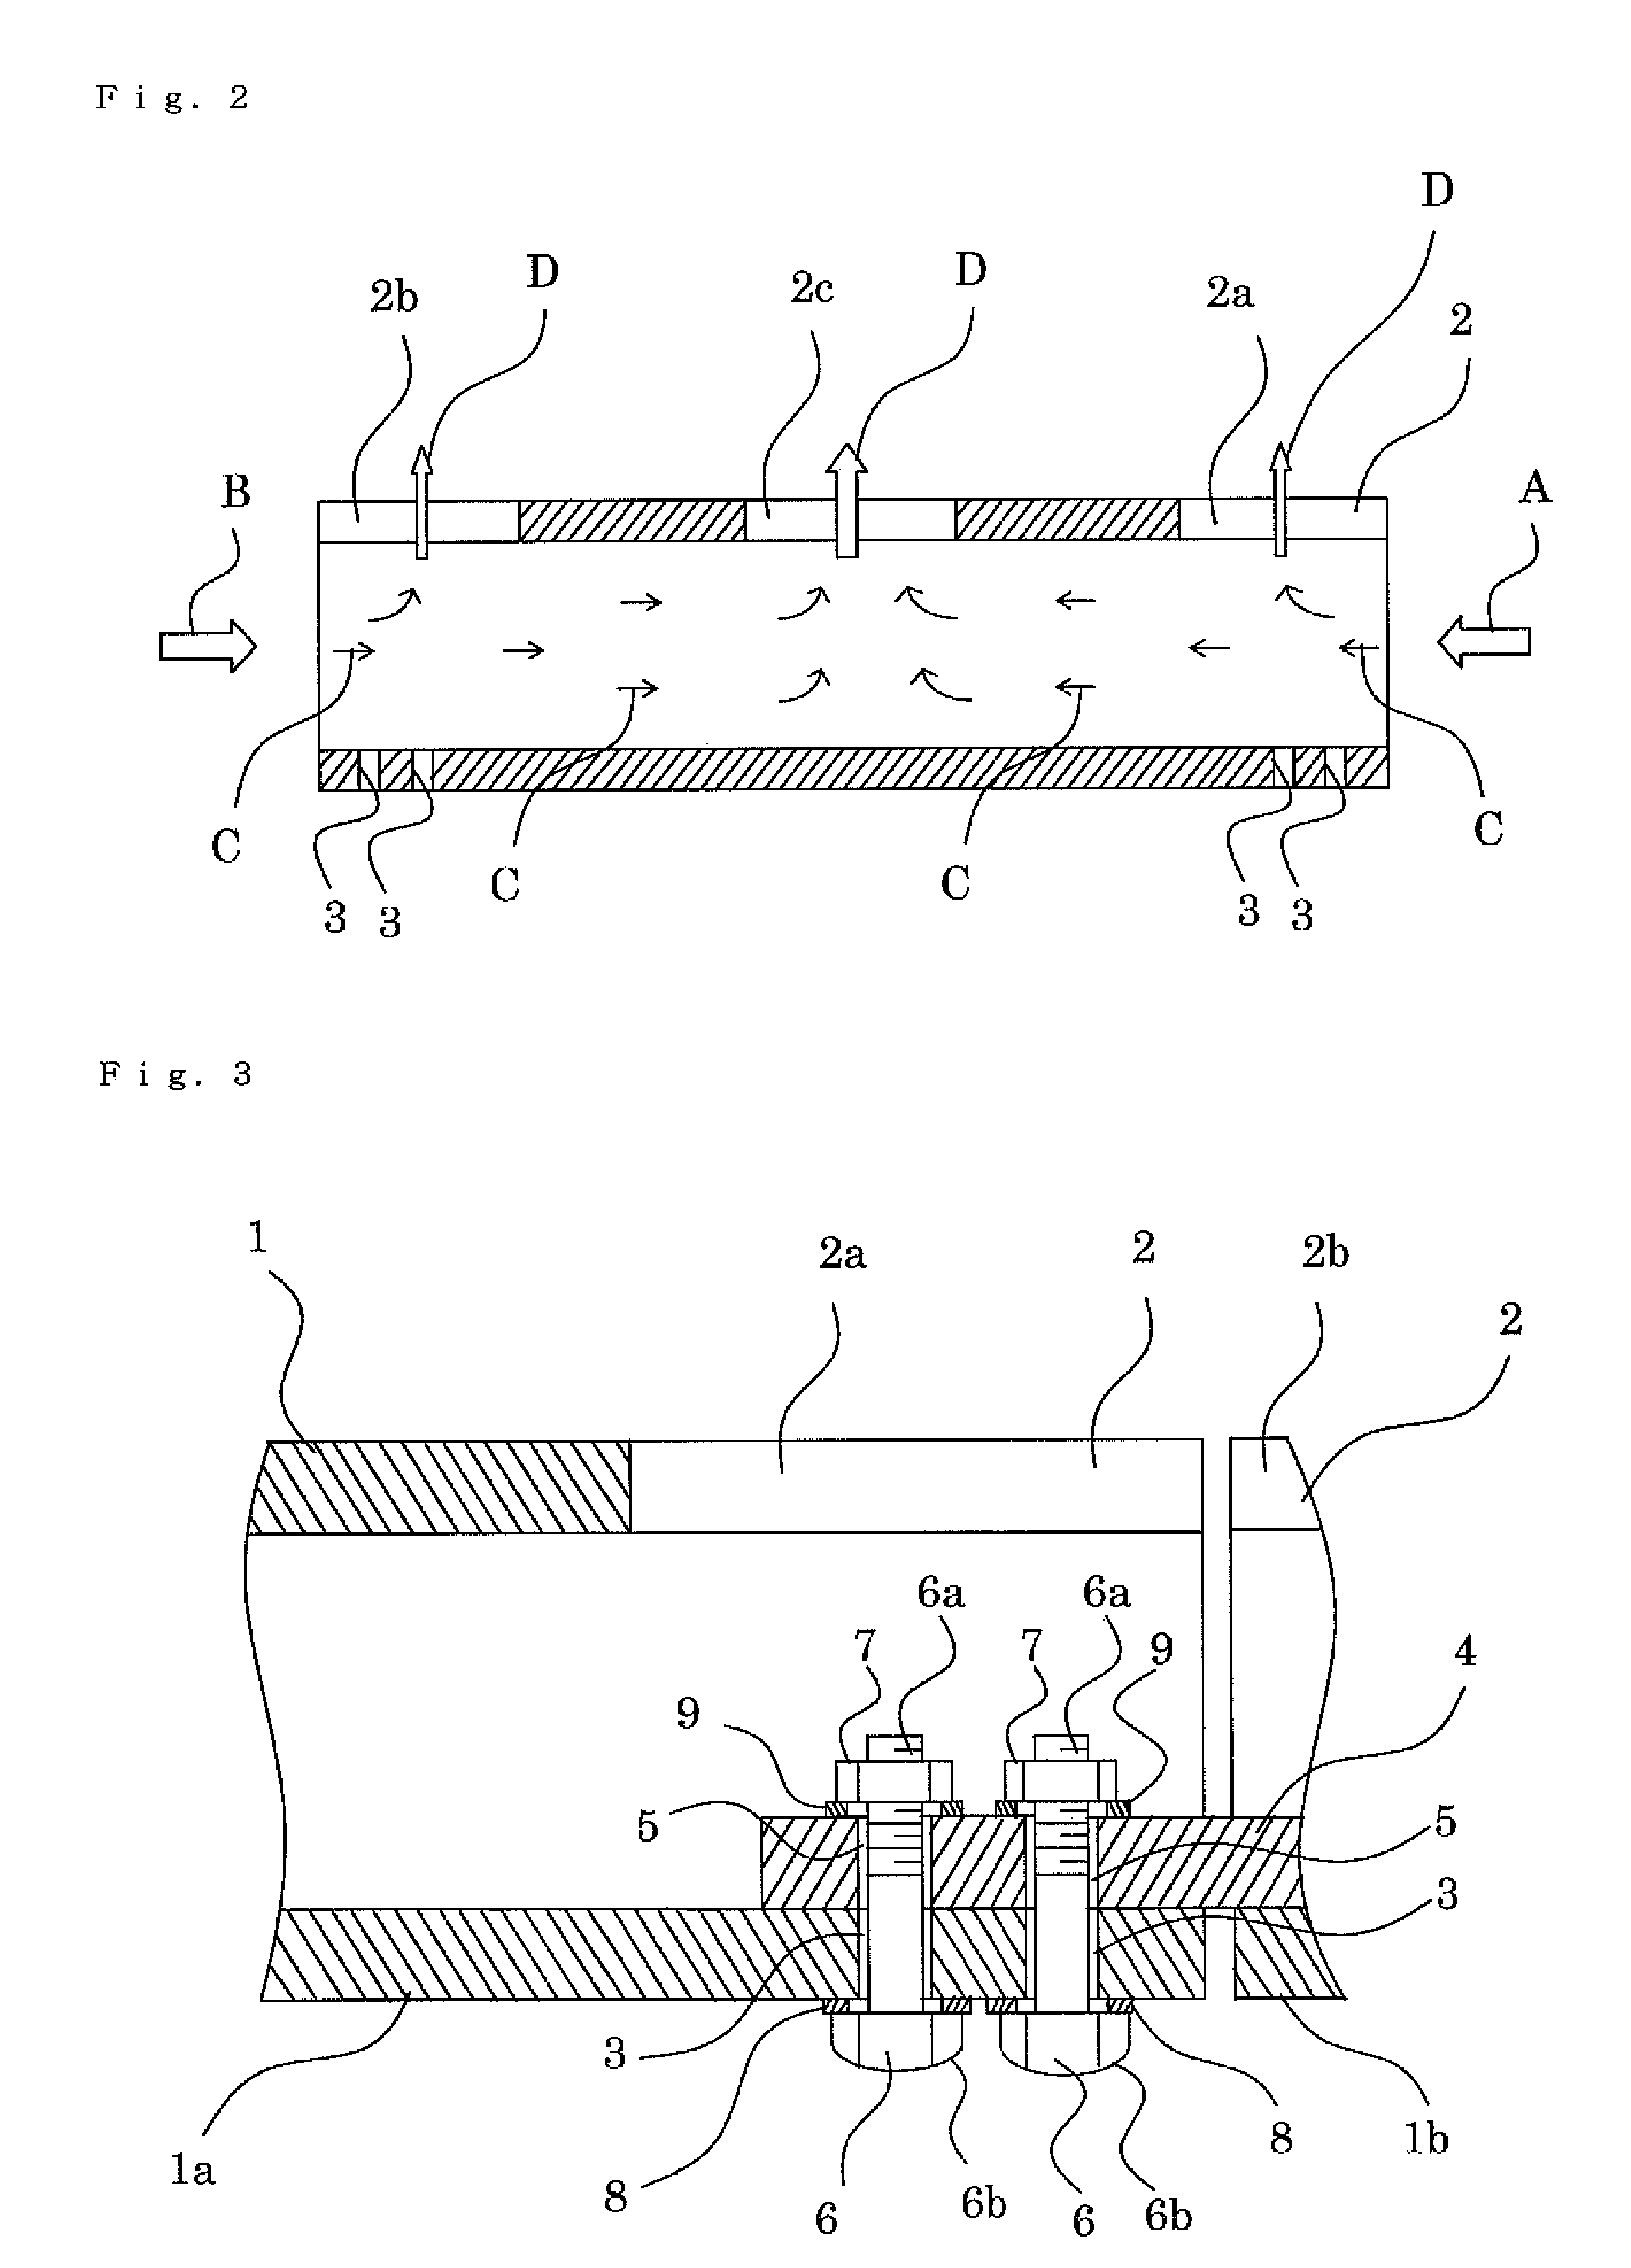 Conductor of high voltage electrical apparatus